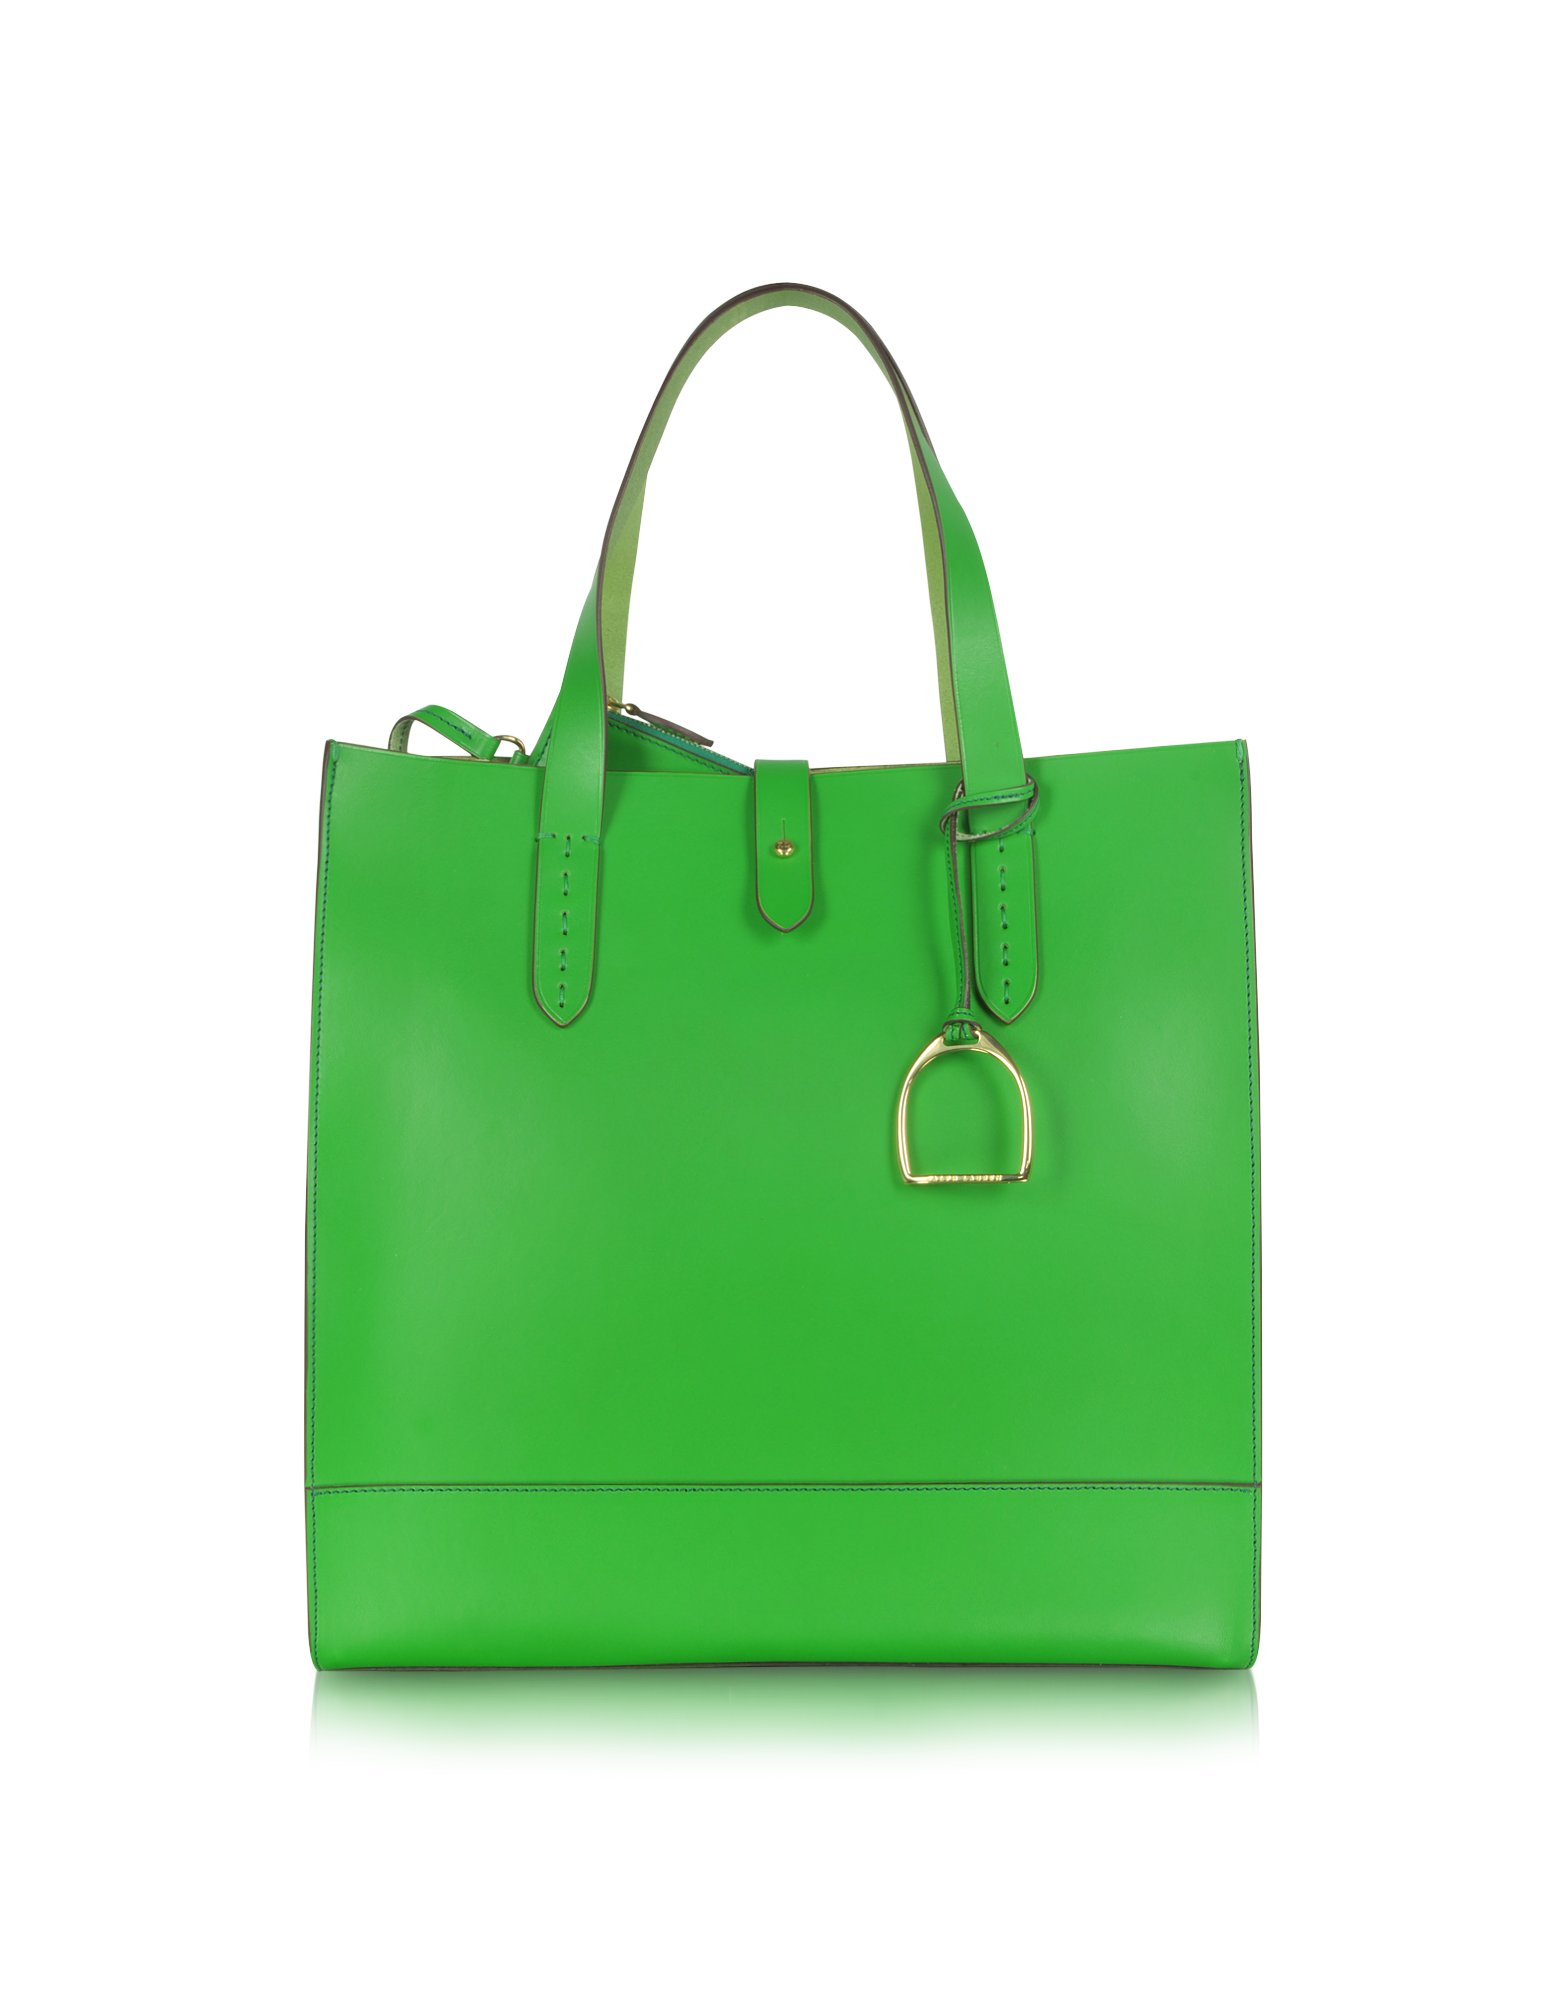 Lyst - Ralph Lauren Collection Saddle Slim Leather Tote in Green